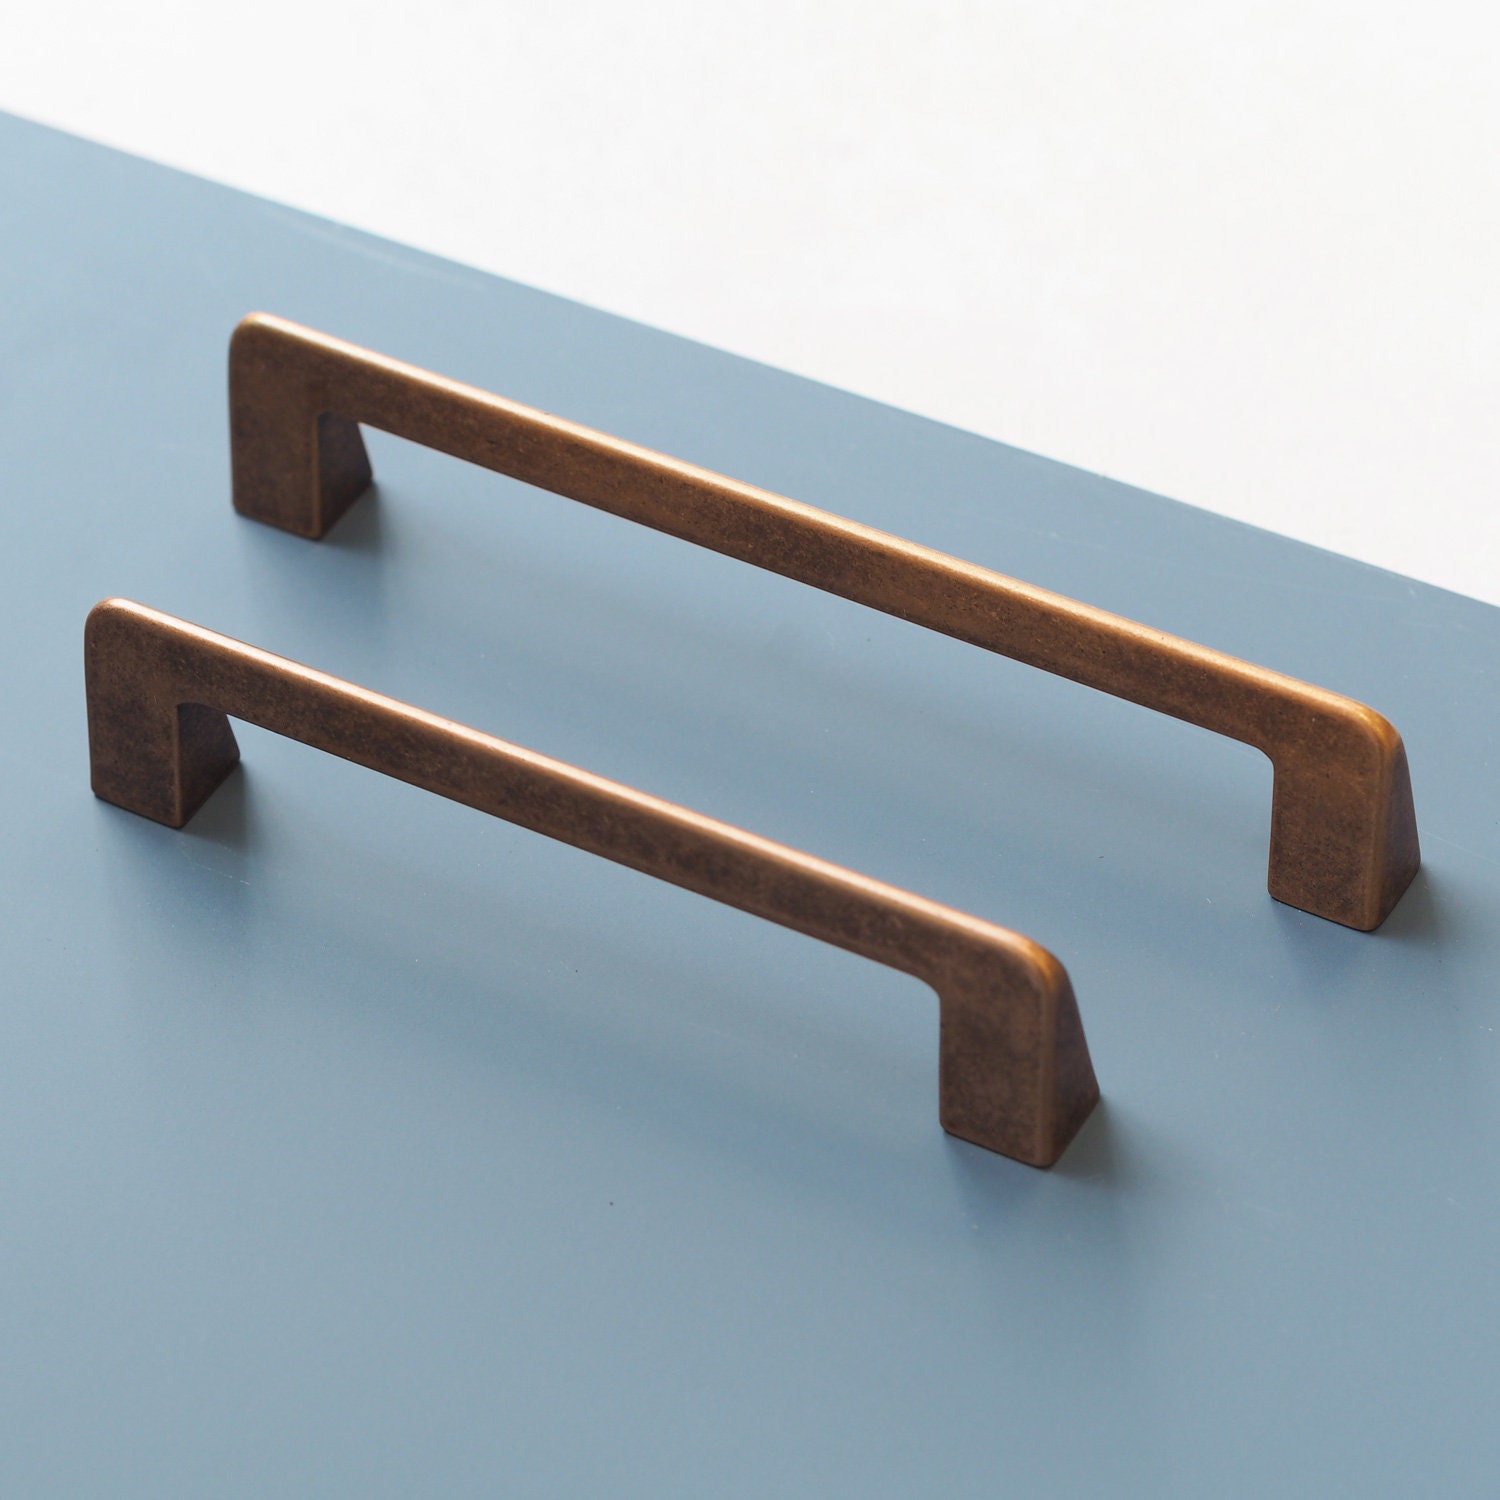 LATITUDE - Wooden Cabinet Handle - 160mm- Walnut clear lacquered